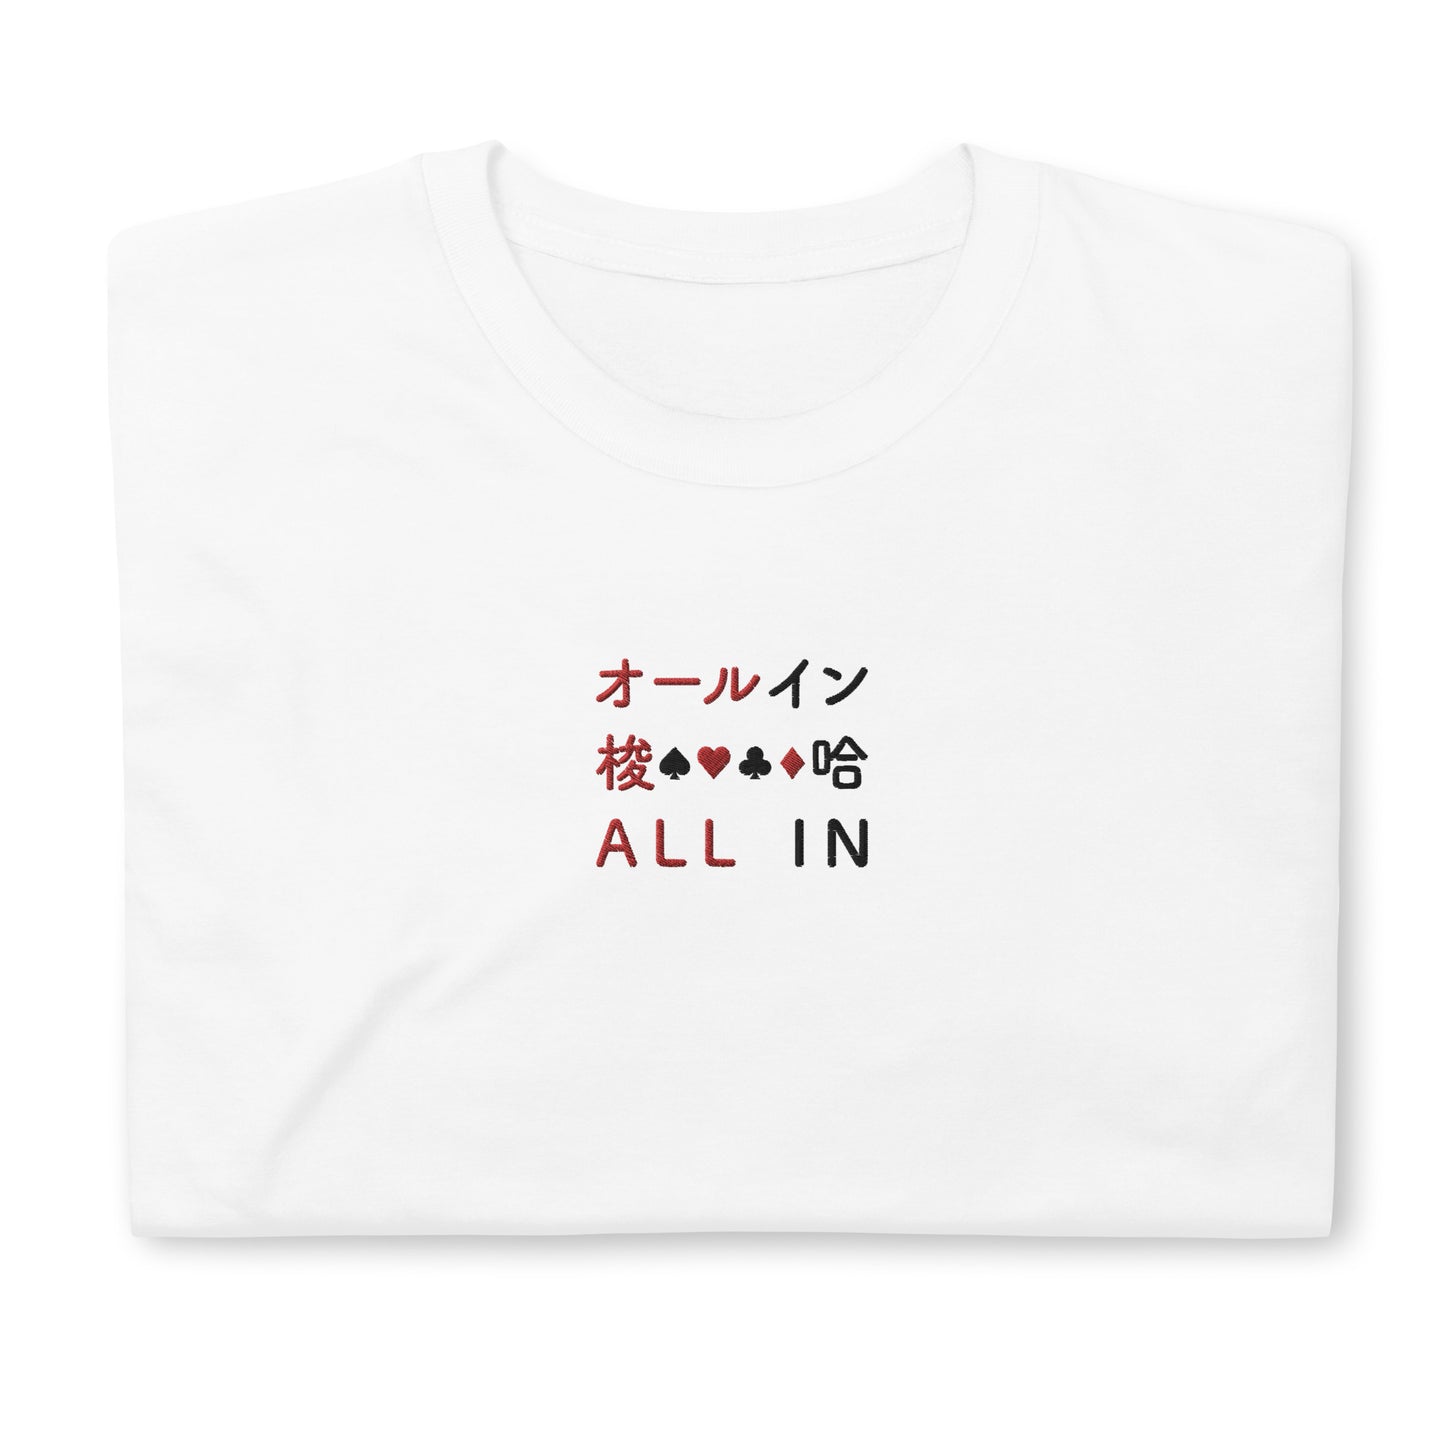 White High Quality Tee - Front Design with an Red, Black Embroidery "All IN" in Japanese,Chinese and English